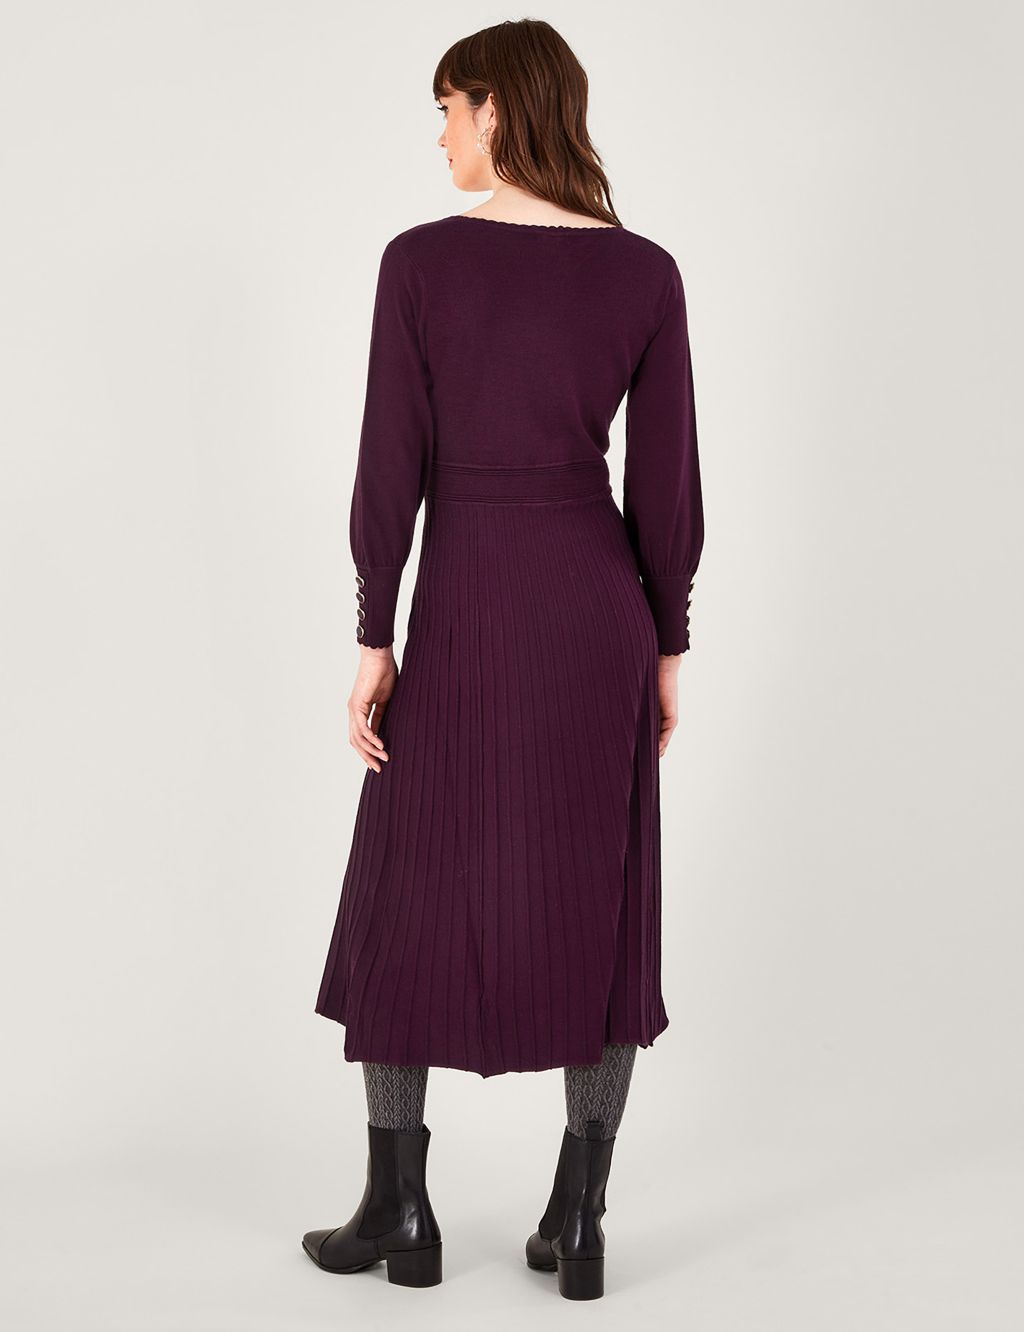 Knitted Pleated Midi Waisted Dress image 2